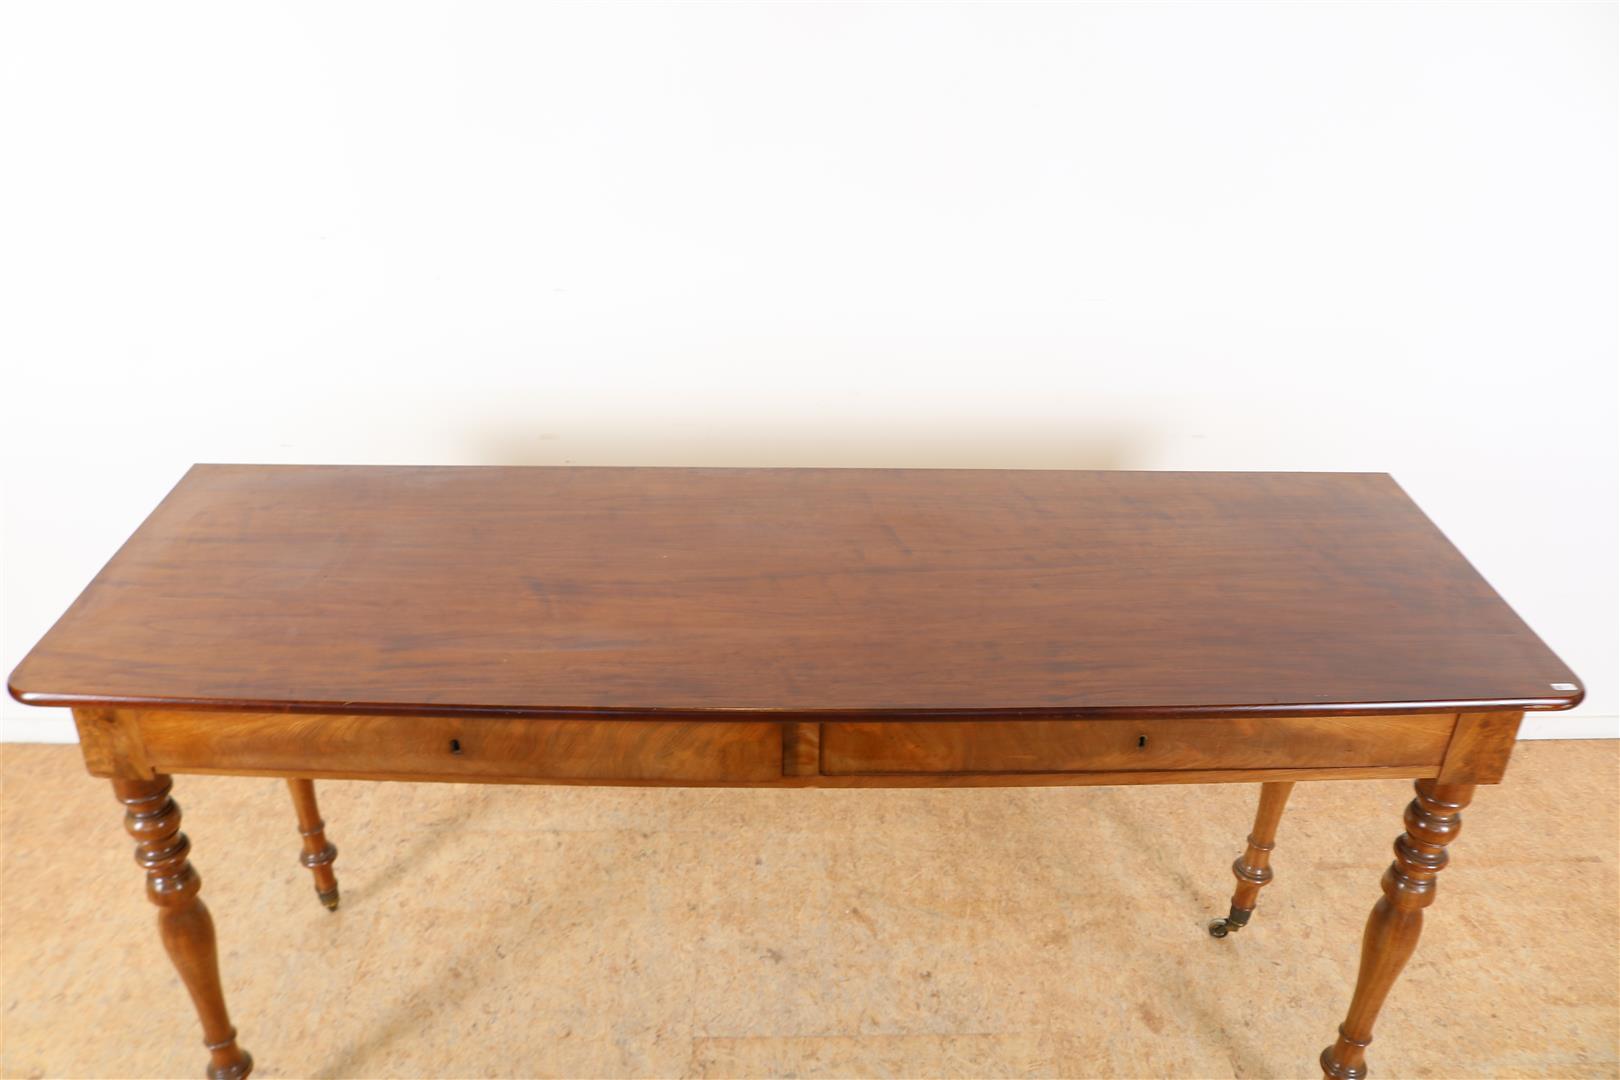 Mahogany Victorian console table with 2 drawers on turned legs with brass wheels, England ca. - Image 2 of 4